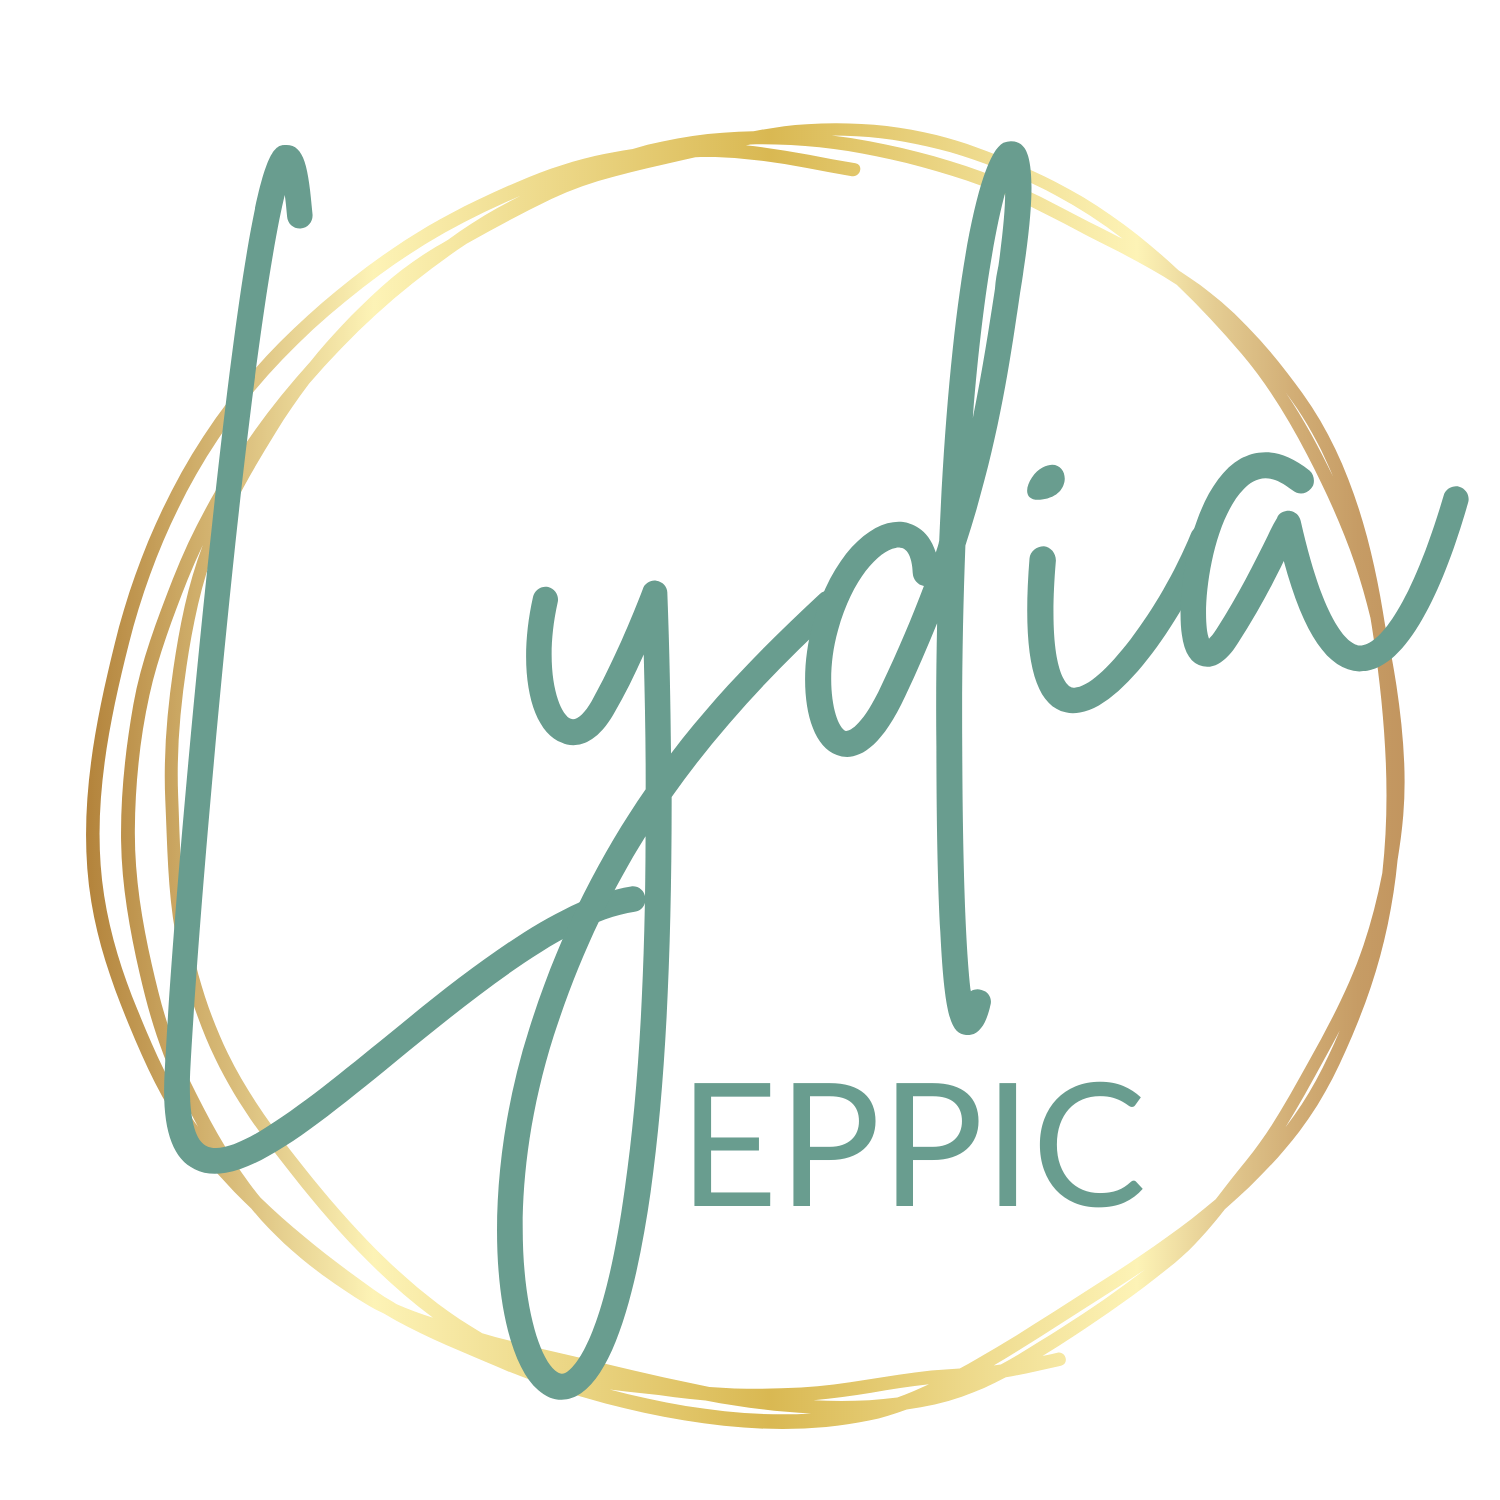 Living WELL with Lydia Eppic